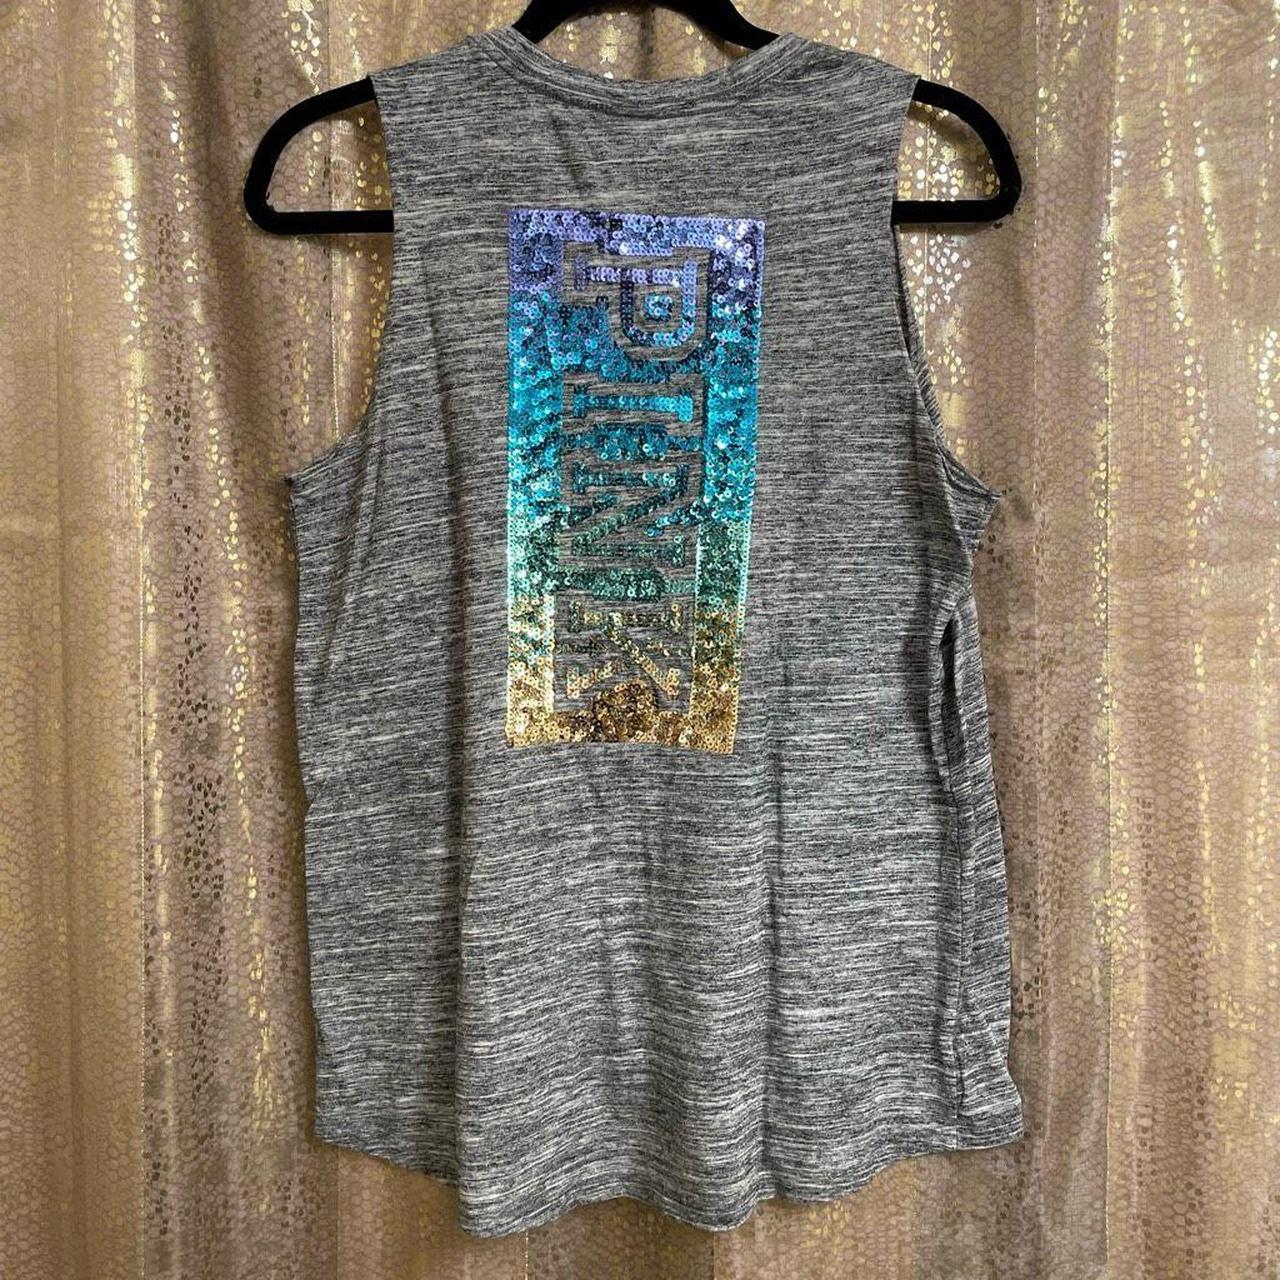 Ombre Bling Tank Top